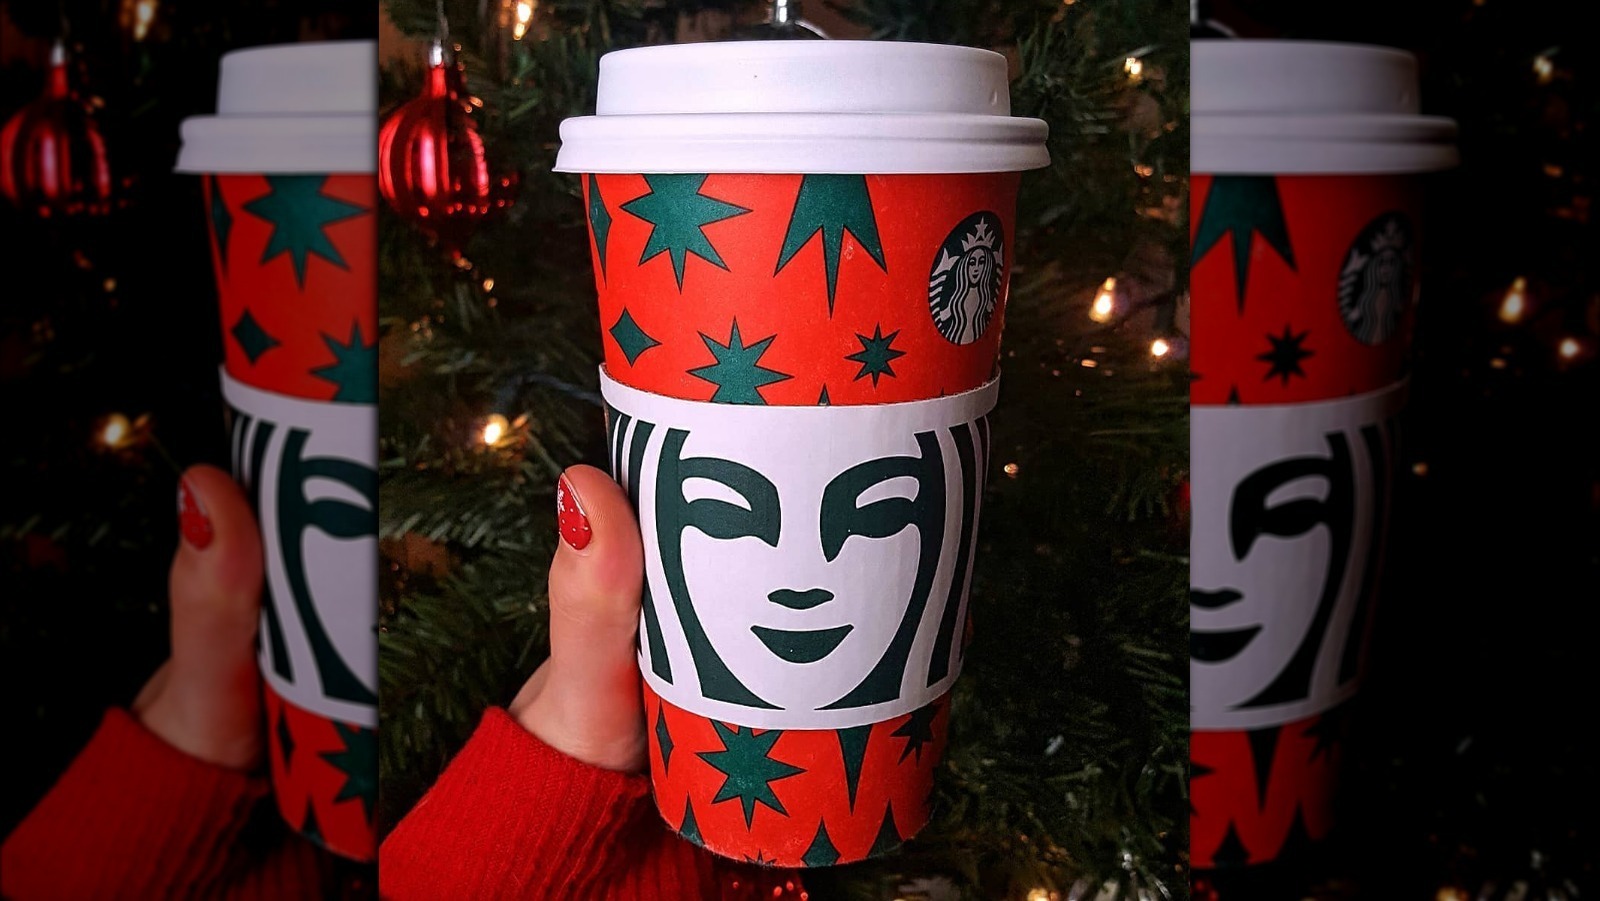 Starbucks Peppermint Mocha: What To Know Before Ordering